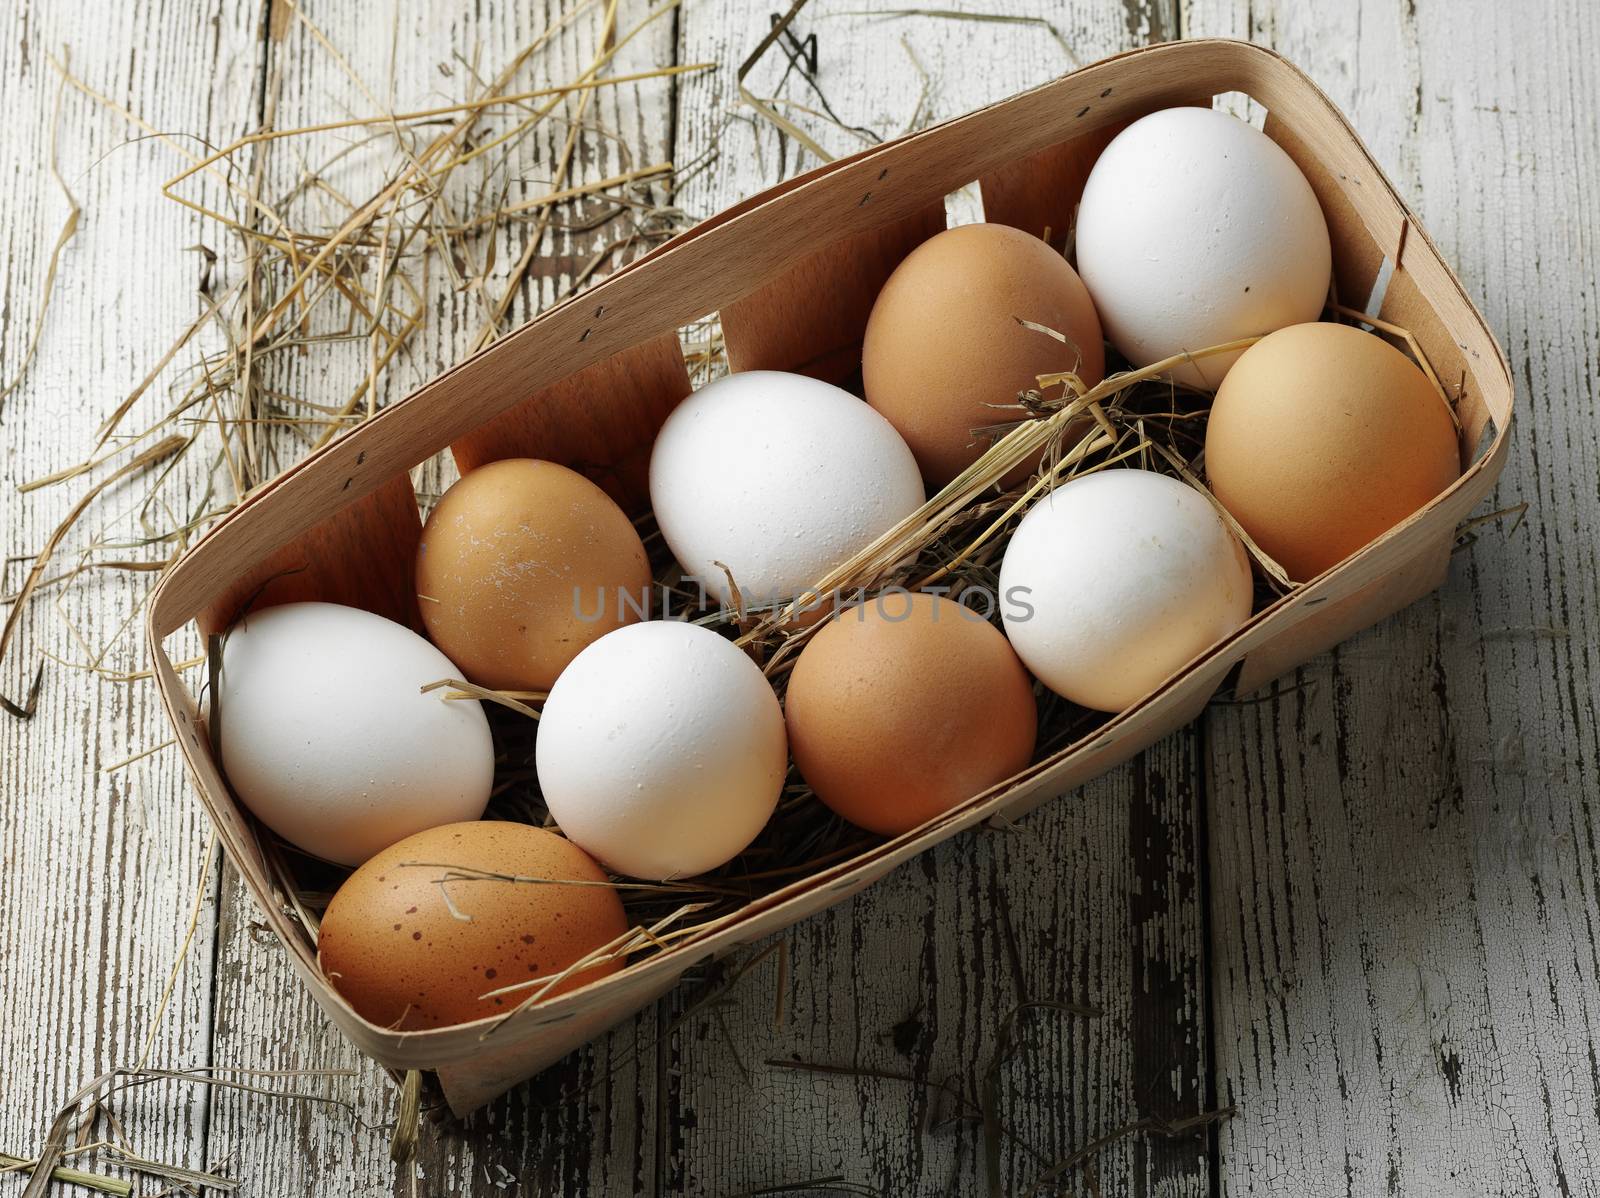 raw chiken eggs in the wooden box
